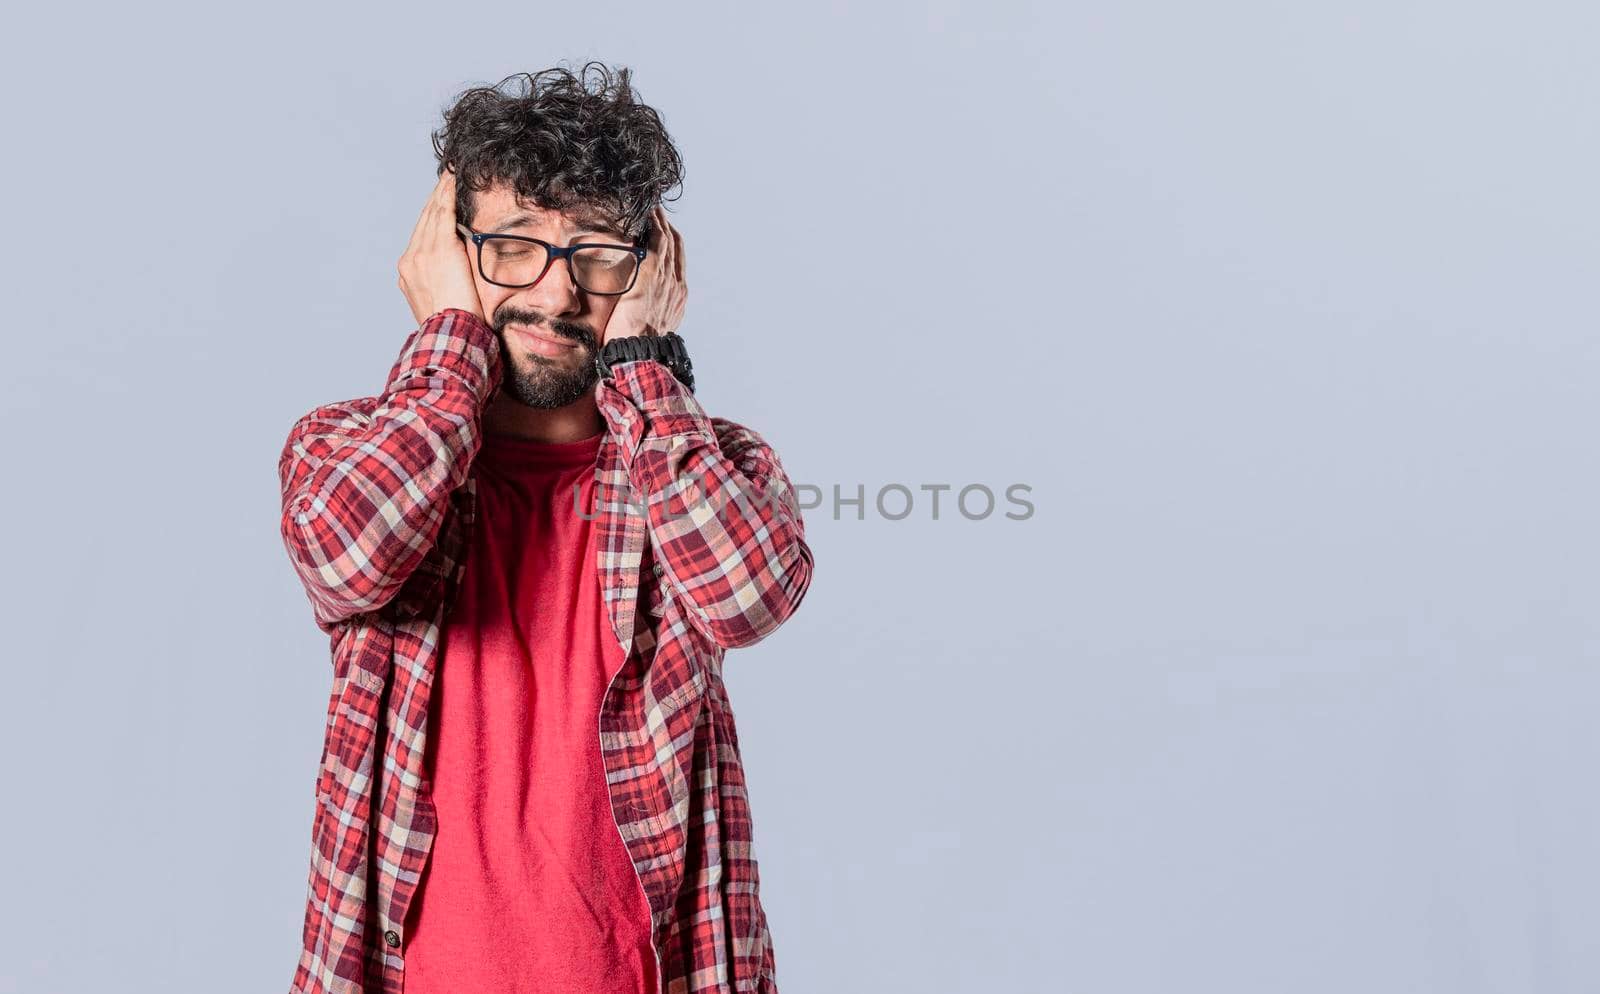 Man covering his ears on isolated background, a guy covering his ears, avoiding hearing, deaf ears concept,